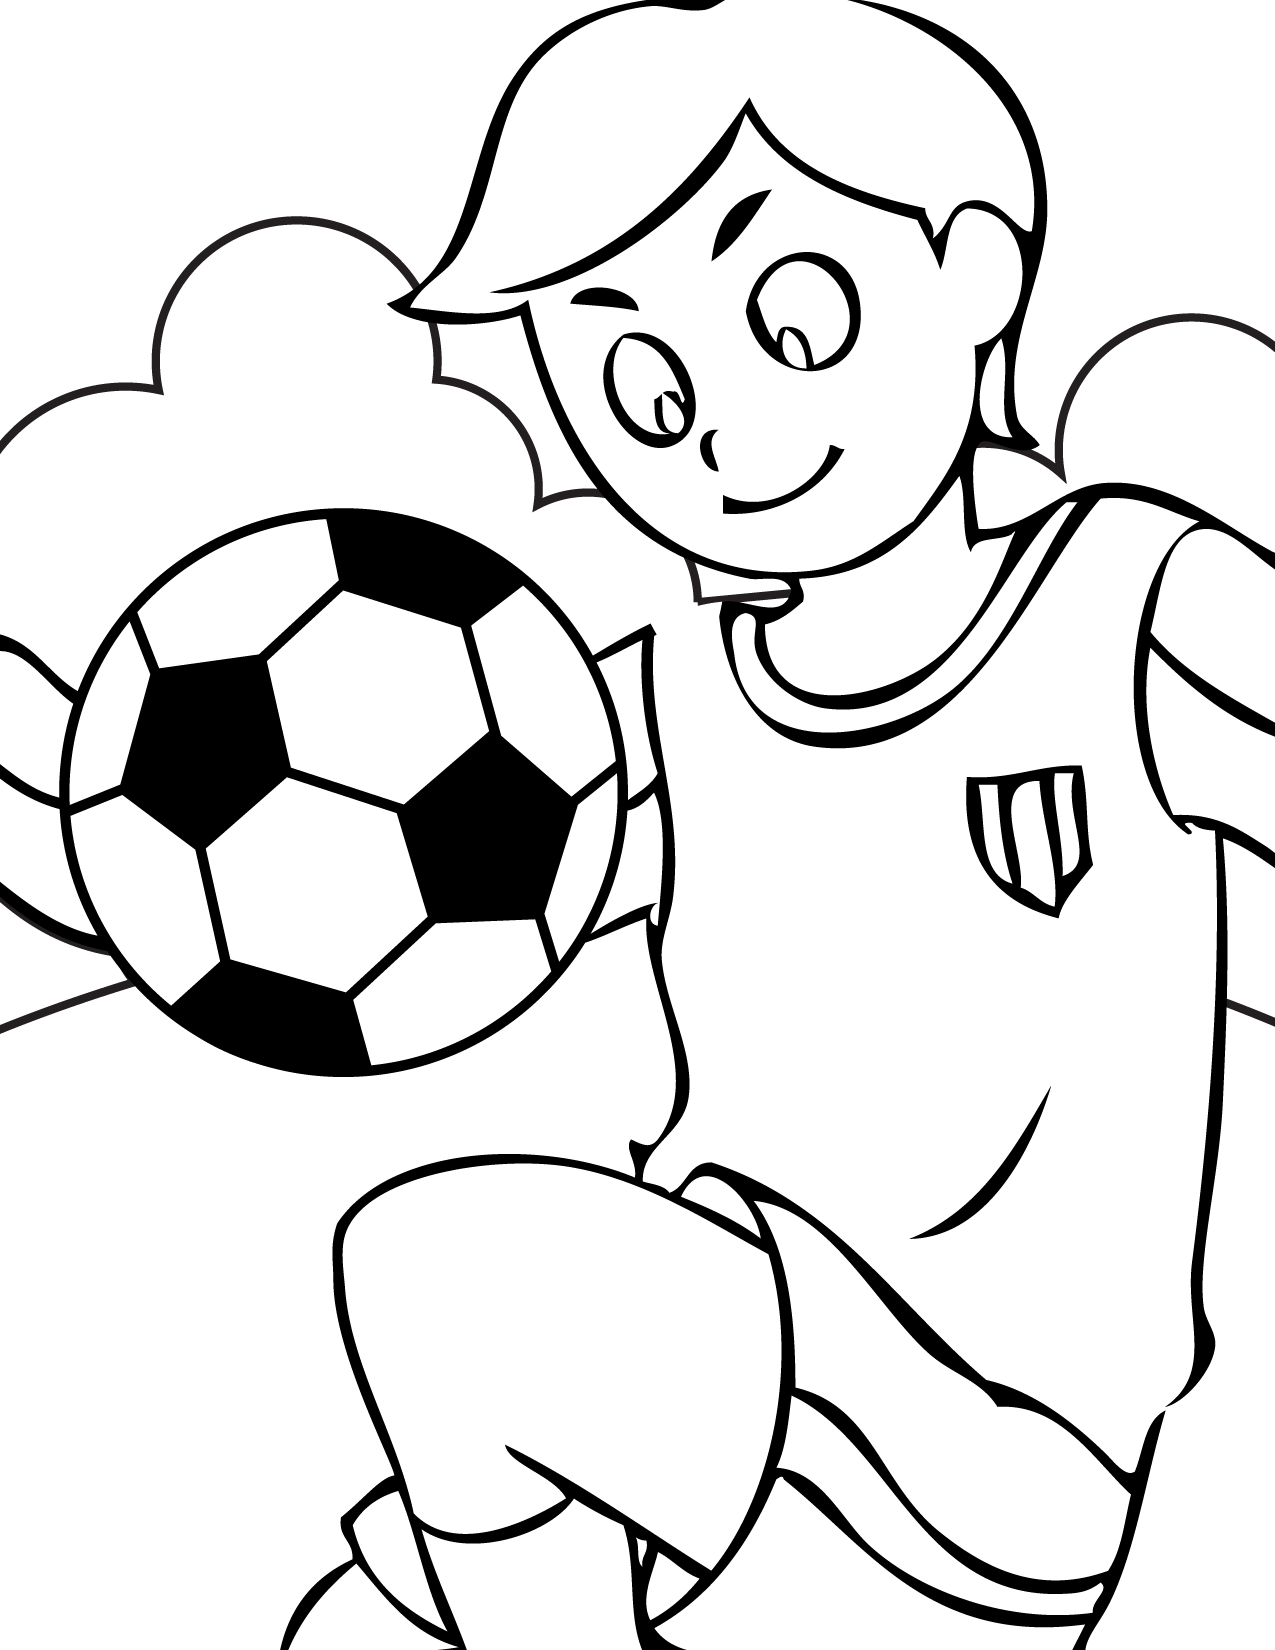 soccer ball color pages